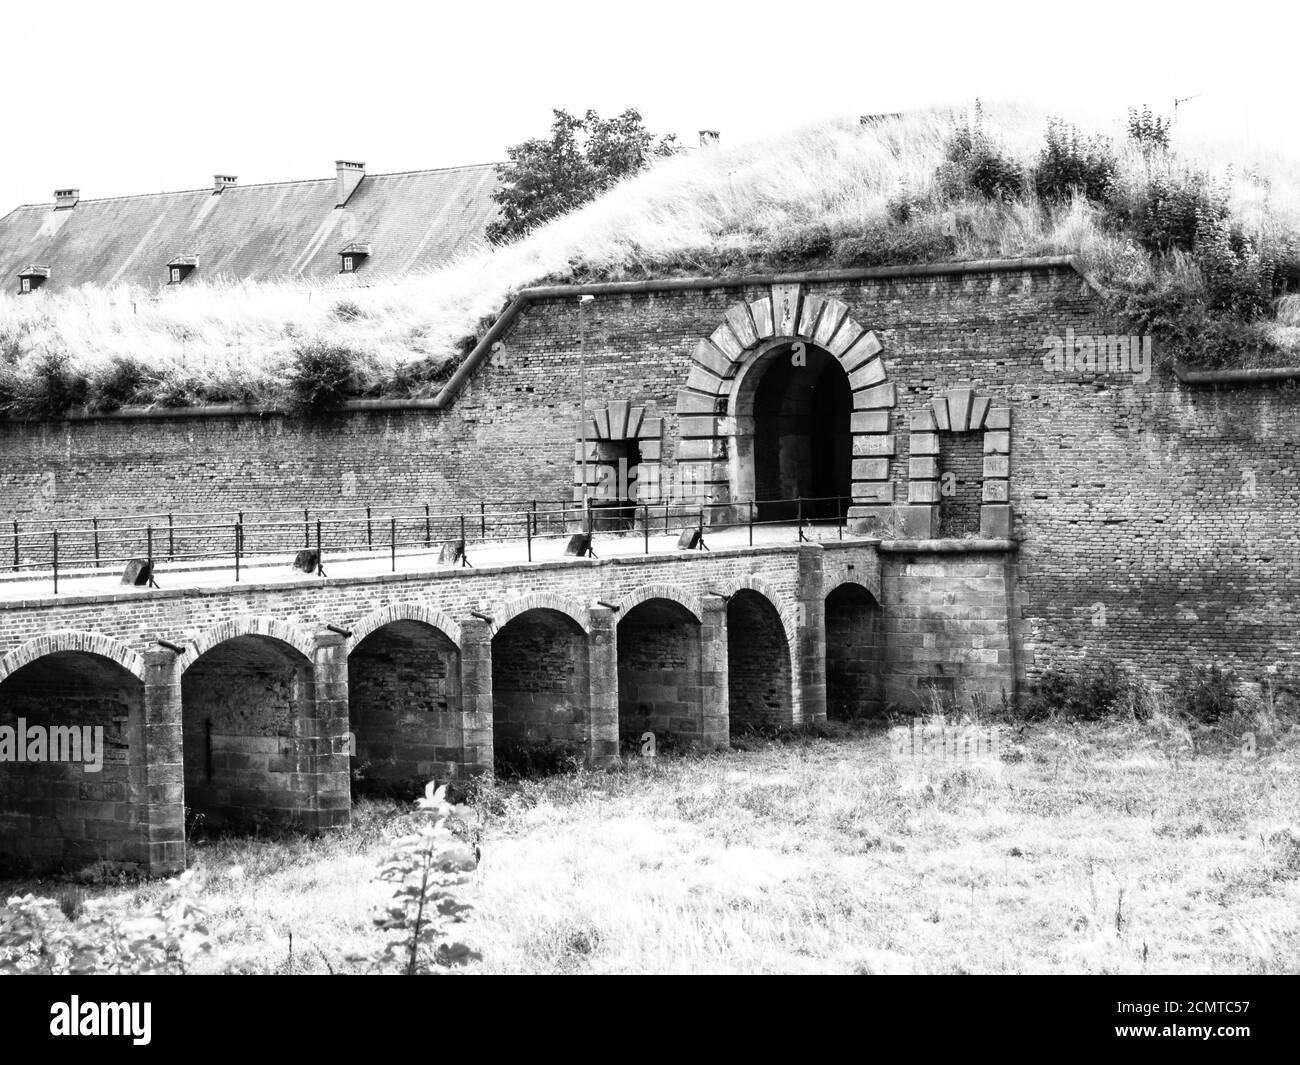 Entrance gate and bridge to the fortificated town Terezin, Czech Republic. Black and white image. Stock Photo